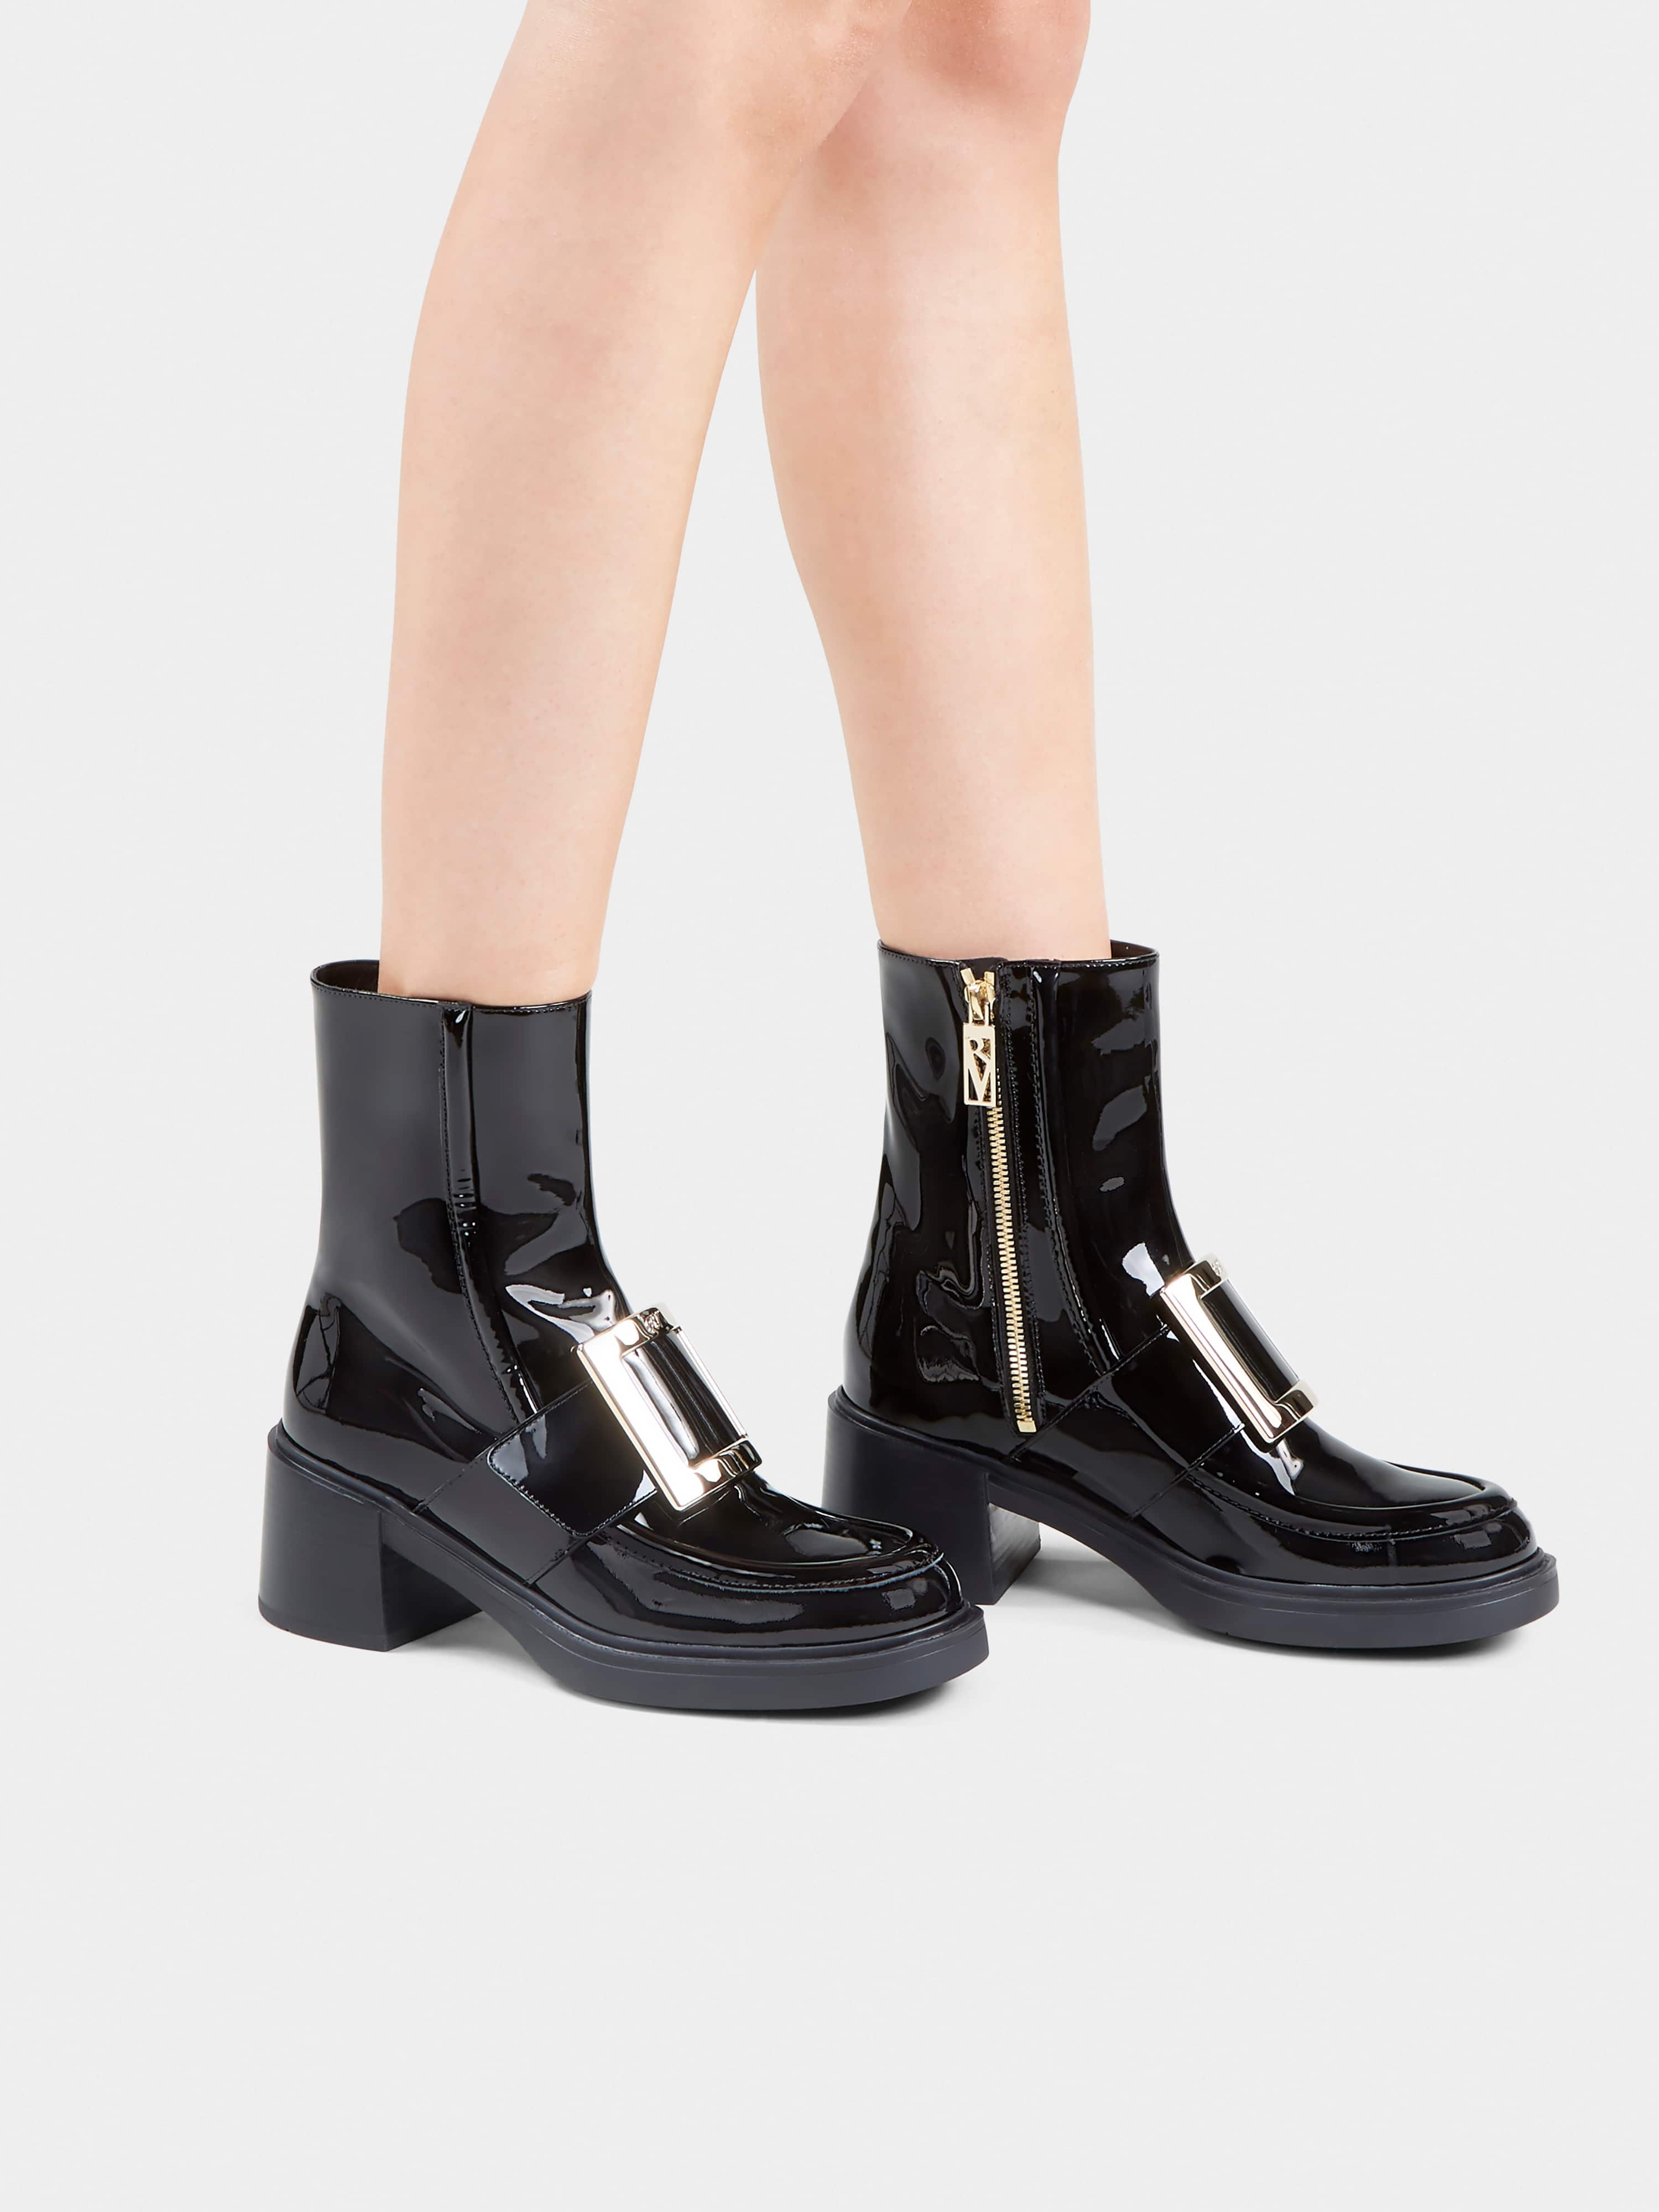 Viv' Rangers Metal Buckle Ankle Boots in Patent Leather - 8